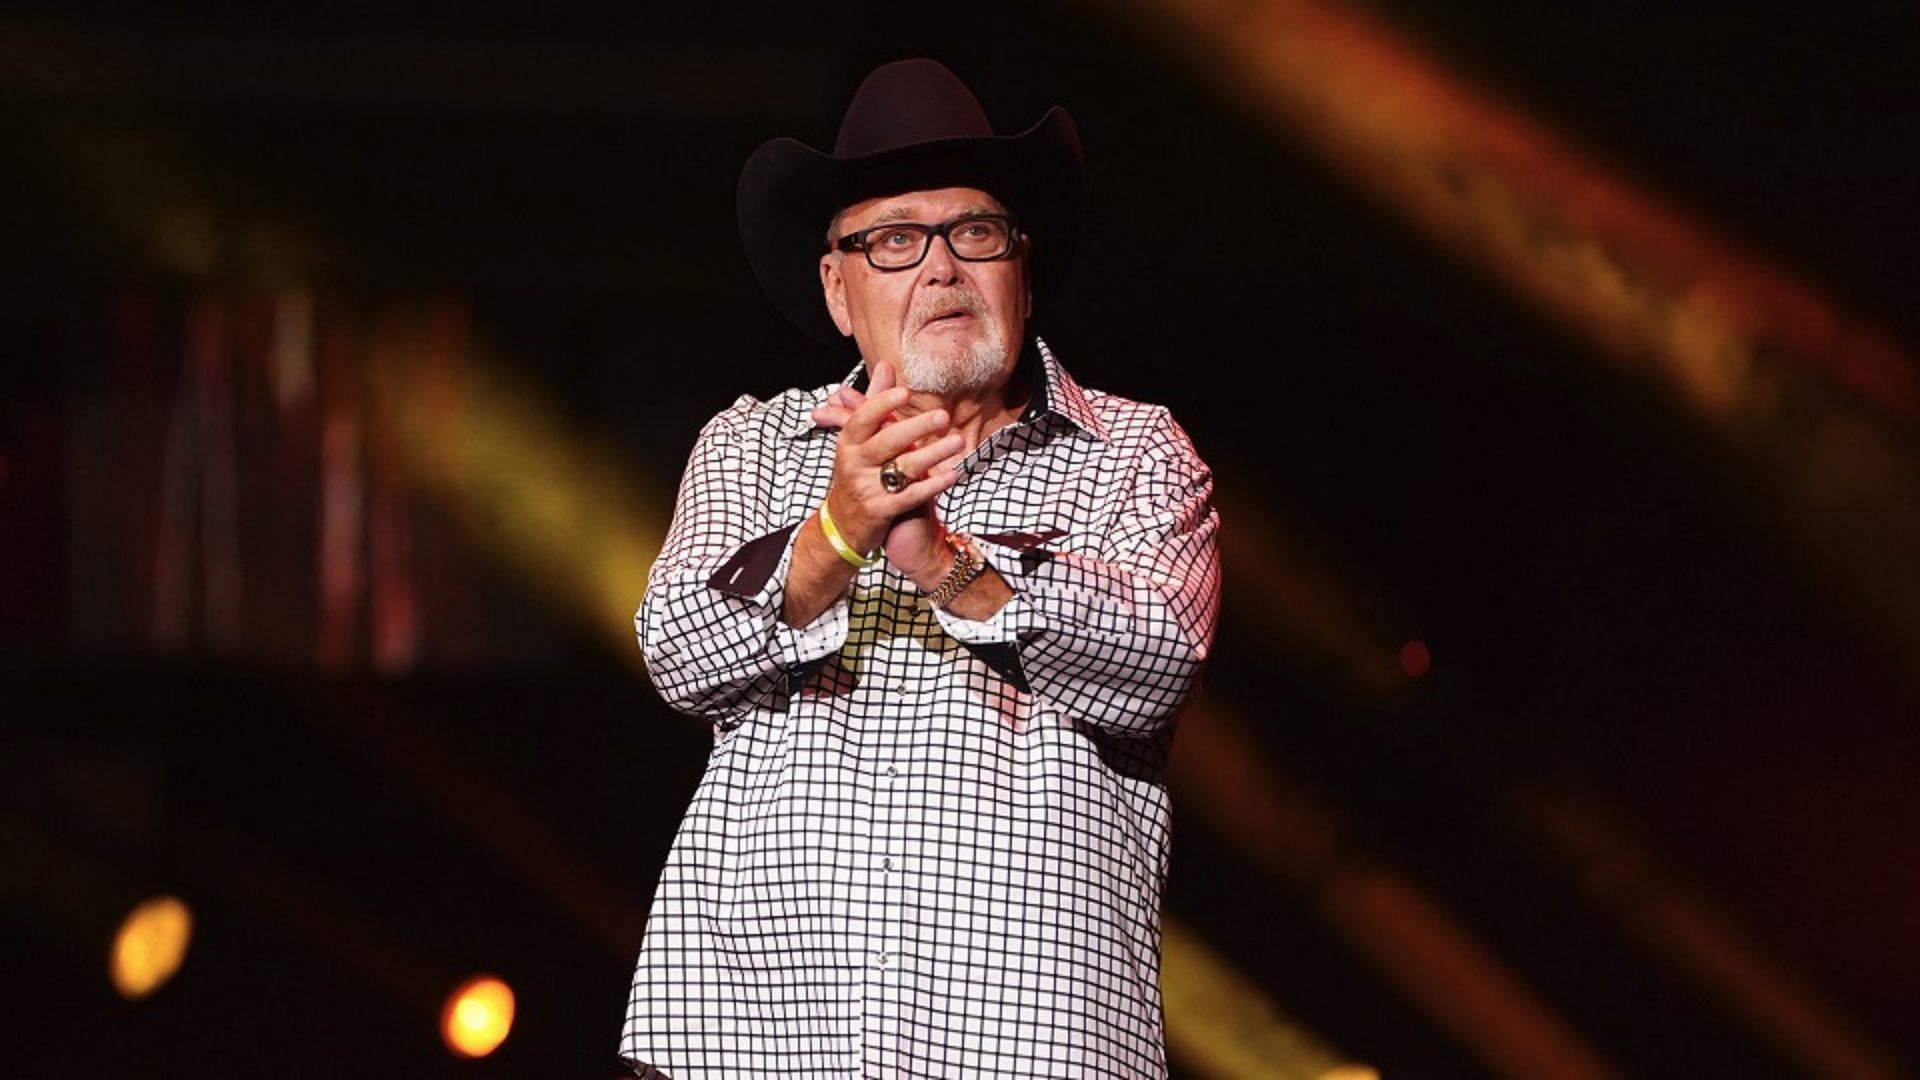 Jim Ross has a lot of nice things to say about an AEW star